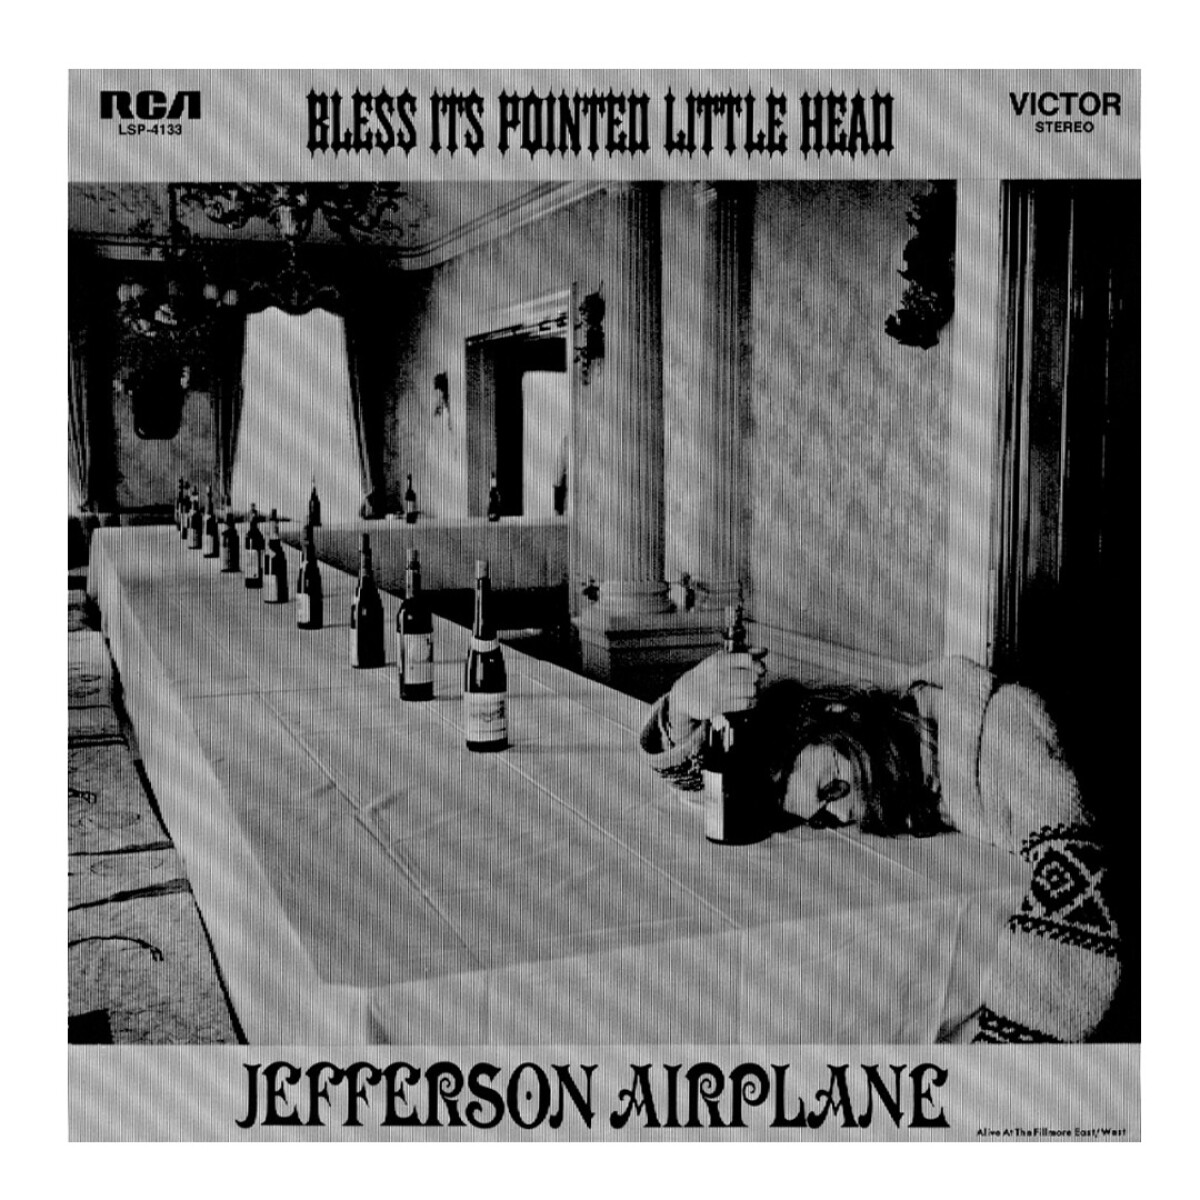 Jefferson Airplane - Bless It's Pointed.. -hq- - Vinilo 